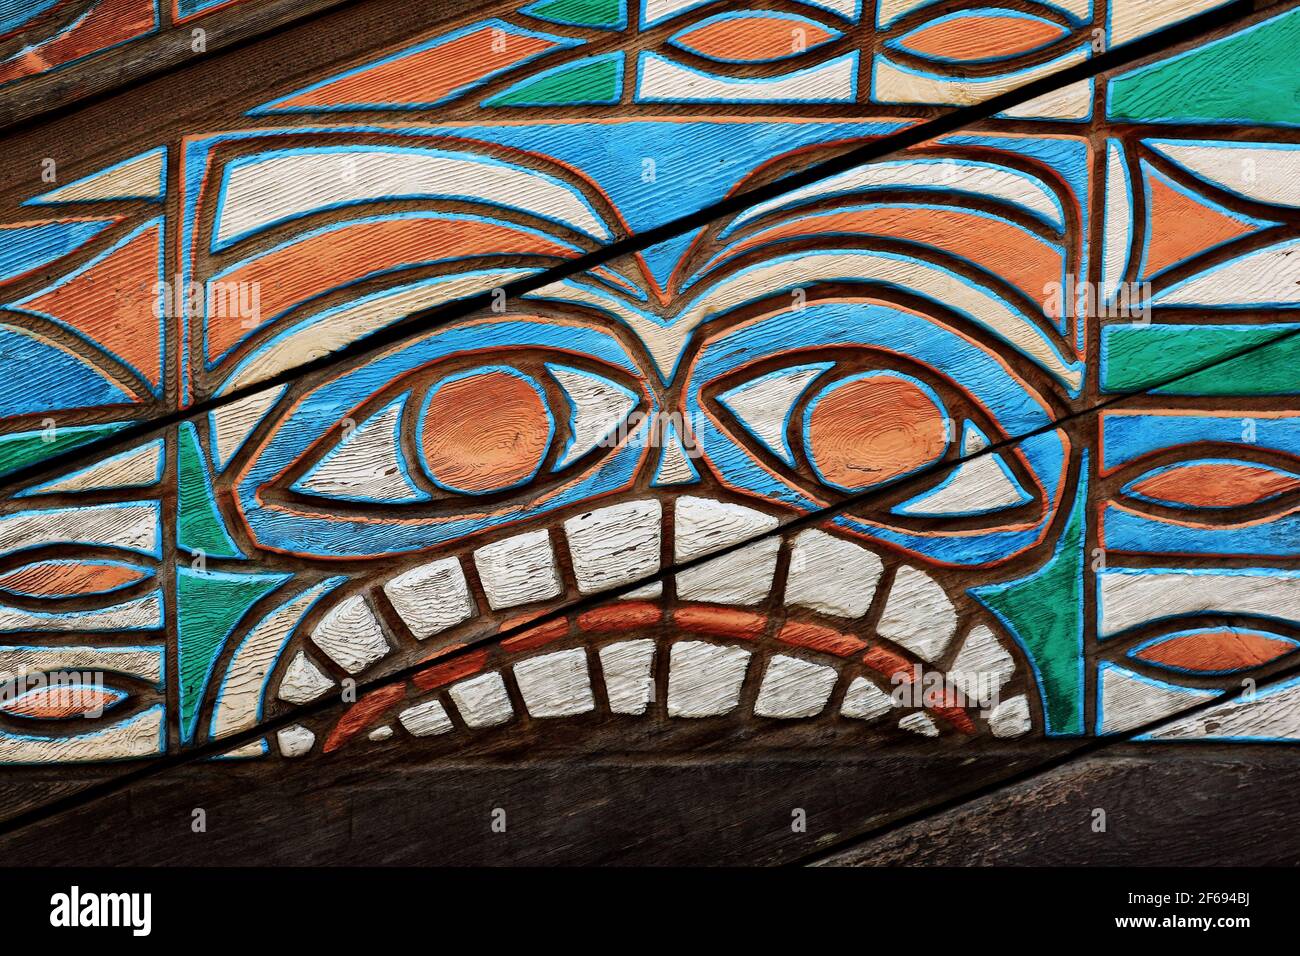 A tribal face etched and painted in wood. Stock Photo